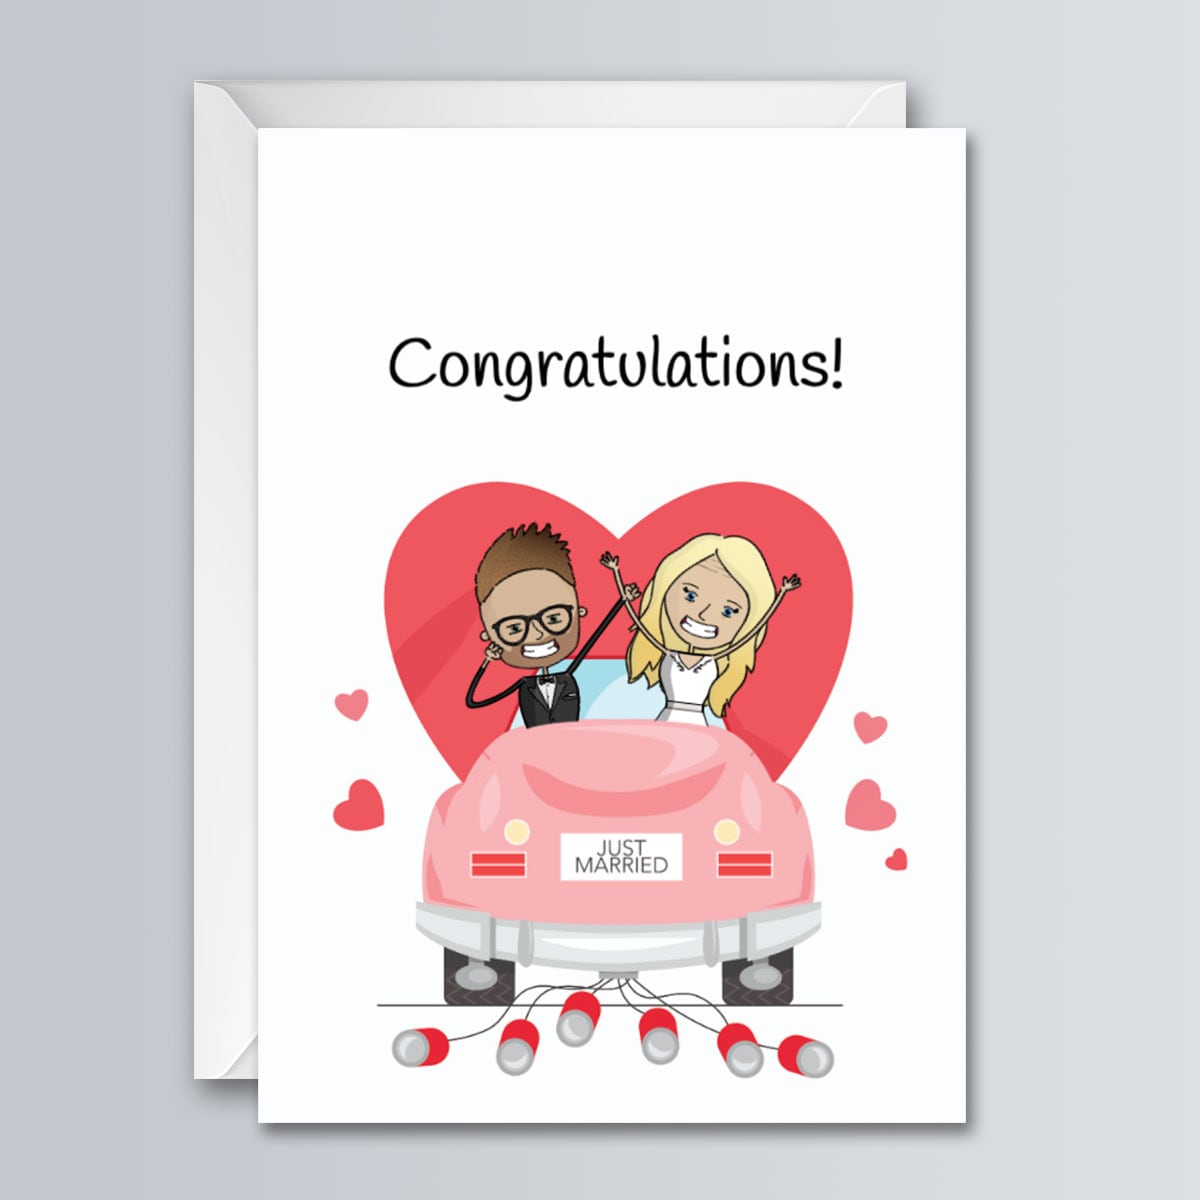 Just Married - Greeting Card